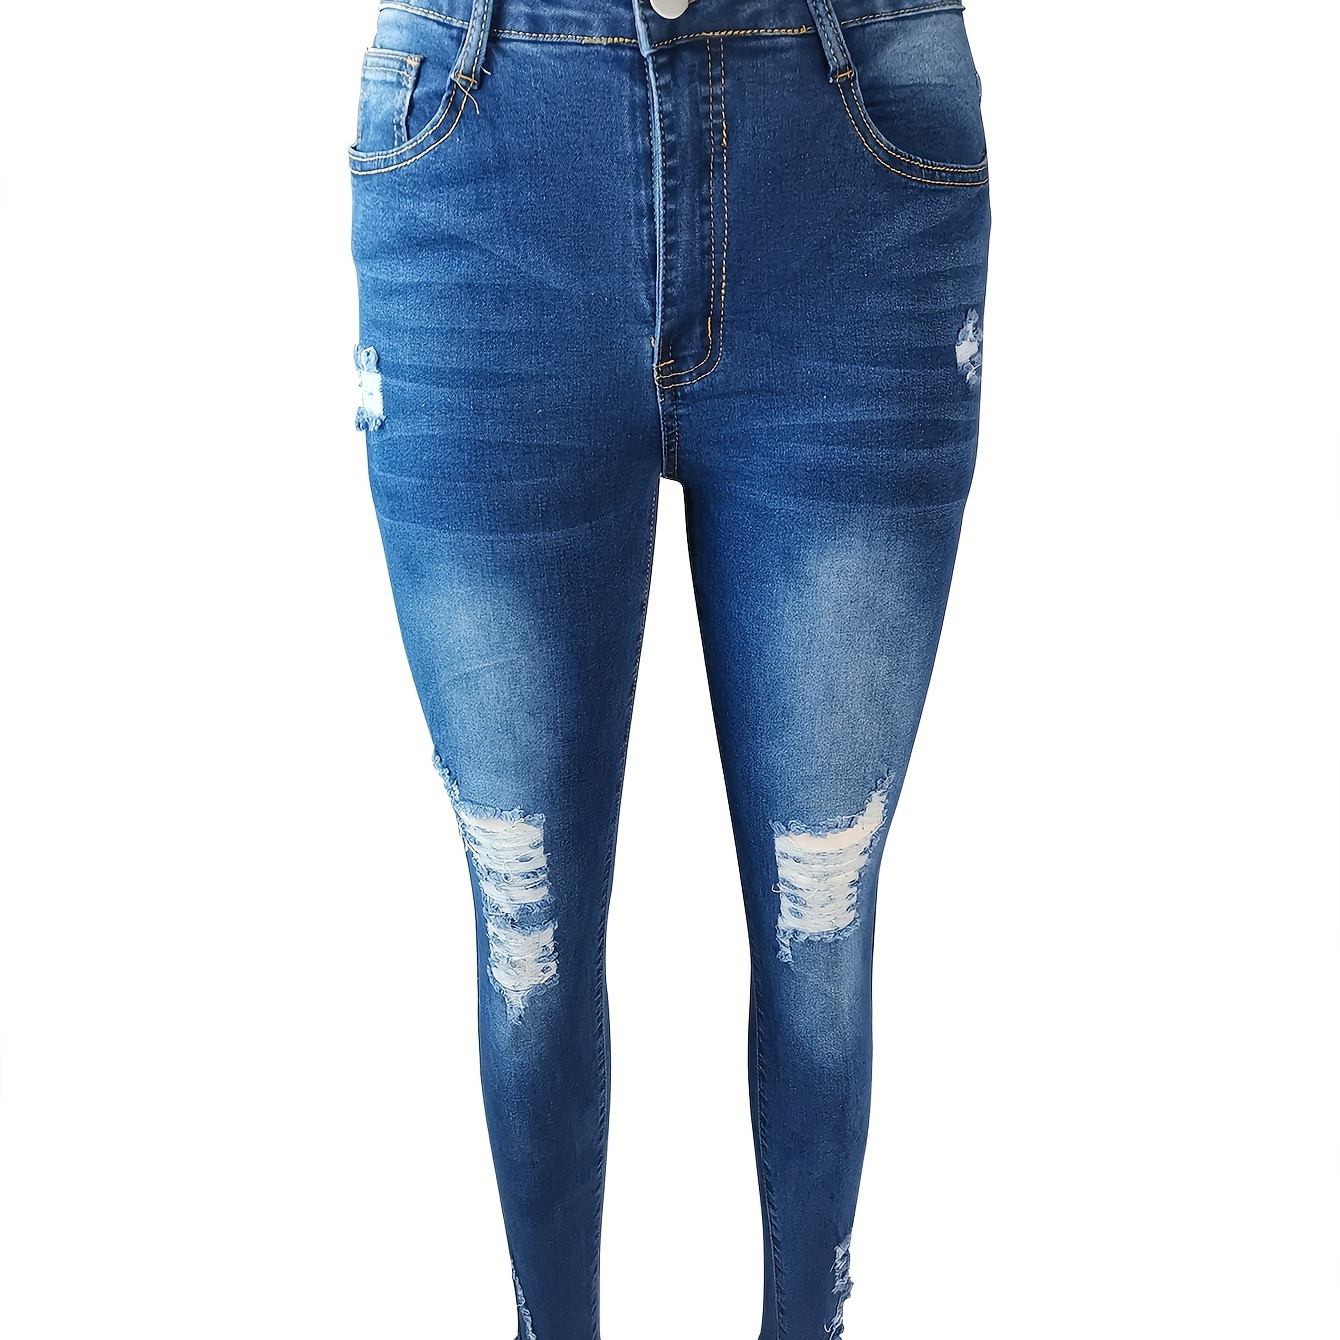 

Dark Blue Ripped Holes Skinny Jeans, Slim Fit Mid-stretch Distressed Casual Denim Pants, Women's Denim Jeans & Clothing